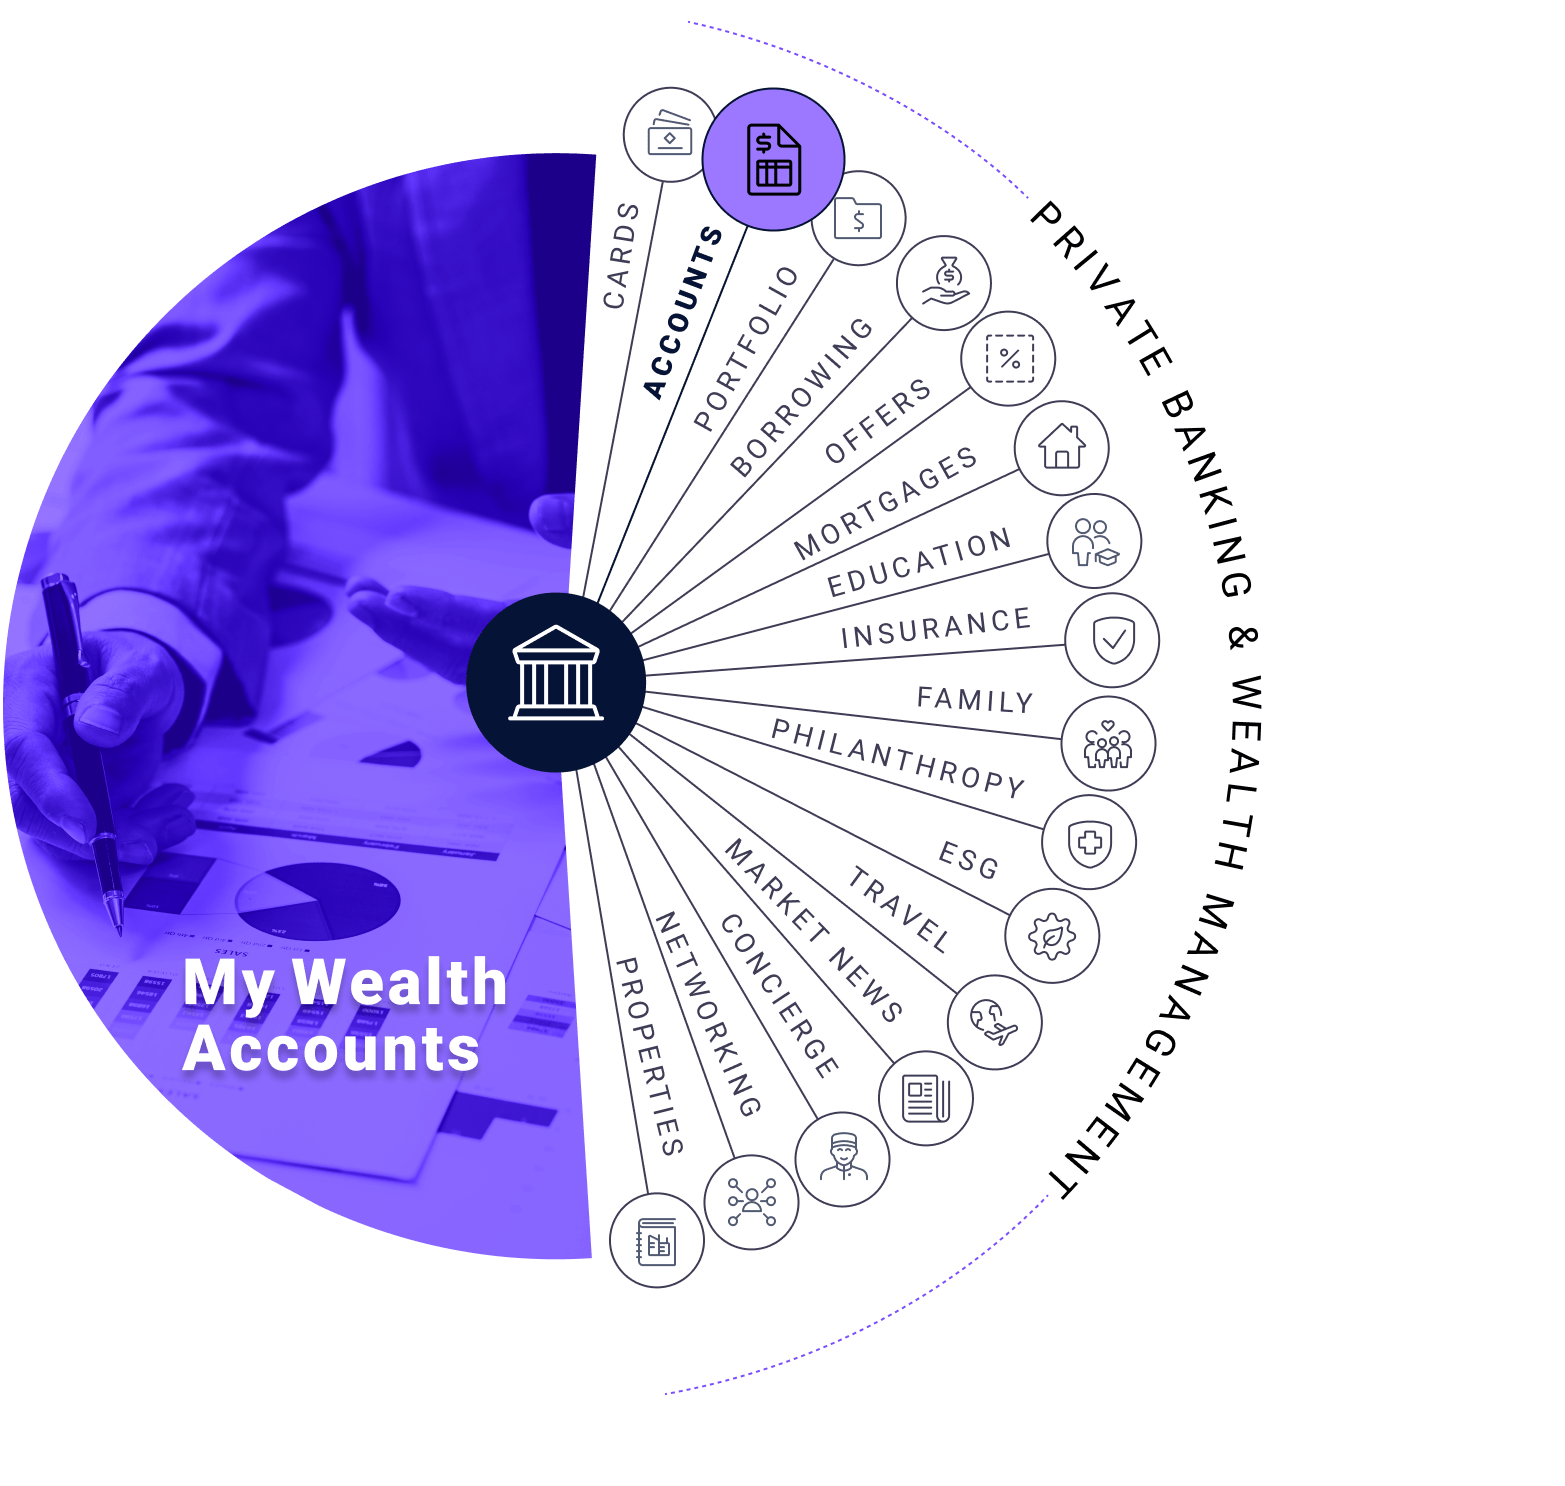 My Wealth accounts: cards, accounts, portfolio, borrowing, offers, mortgages, education, insurance, family, philanthropy, esg, travel, market news, concierge, networking, and properties